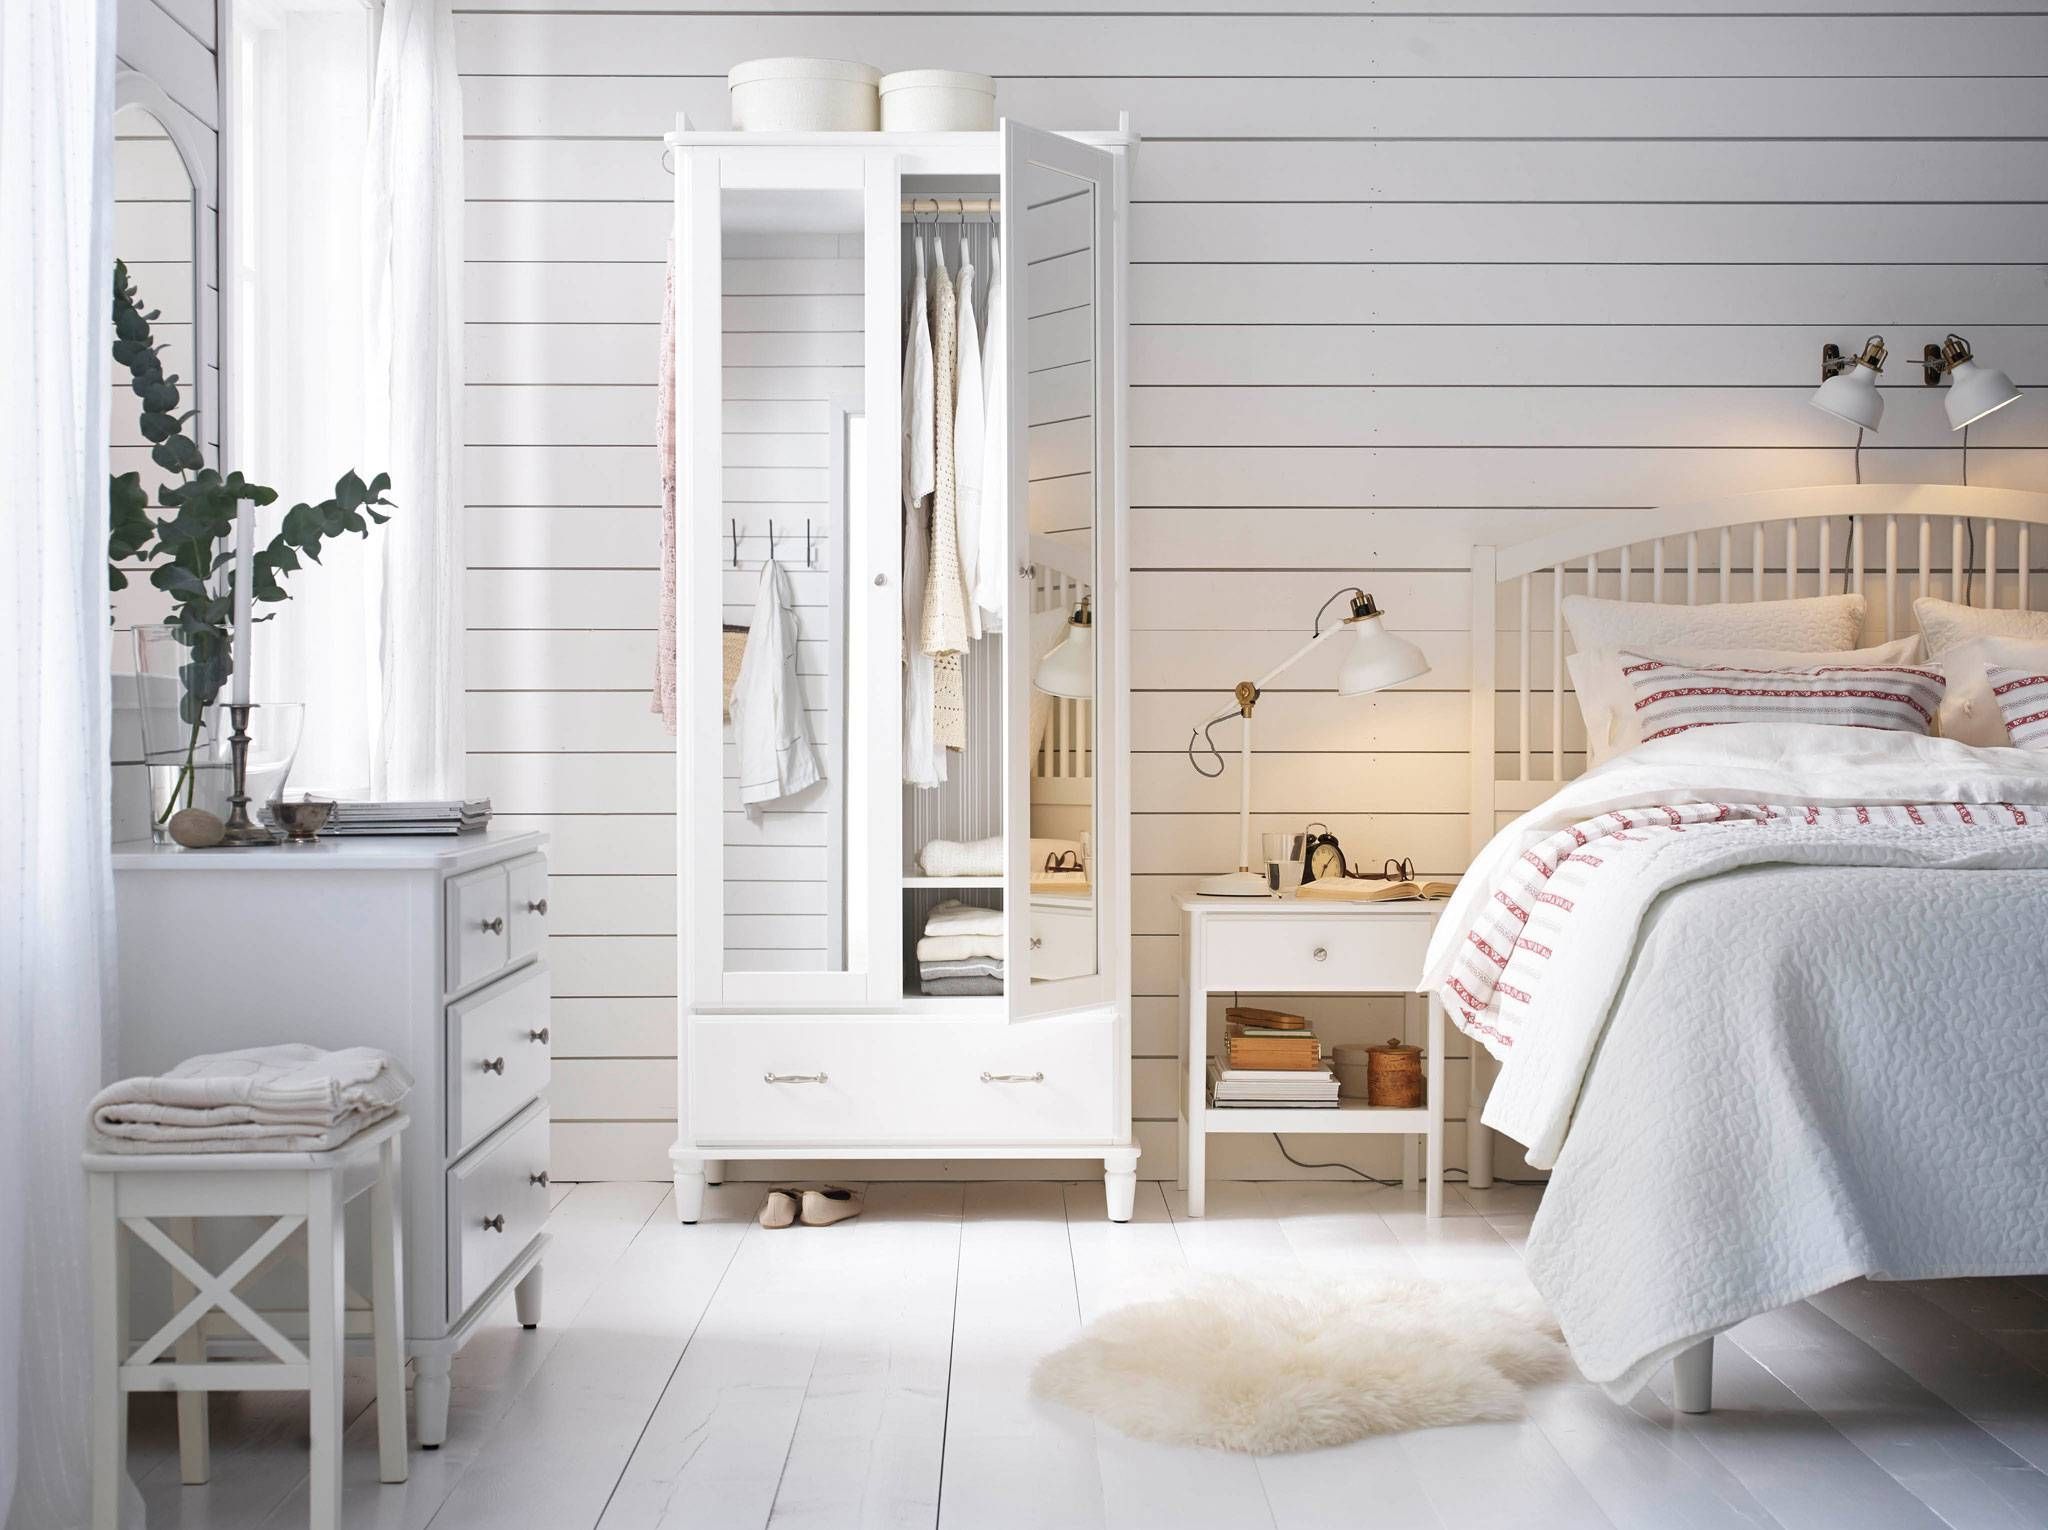 Bedroom Furniture & Ideas | Ikea Throughout White Bedroom Wardrobes (View 3 of 15)